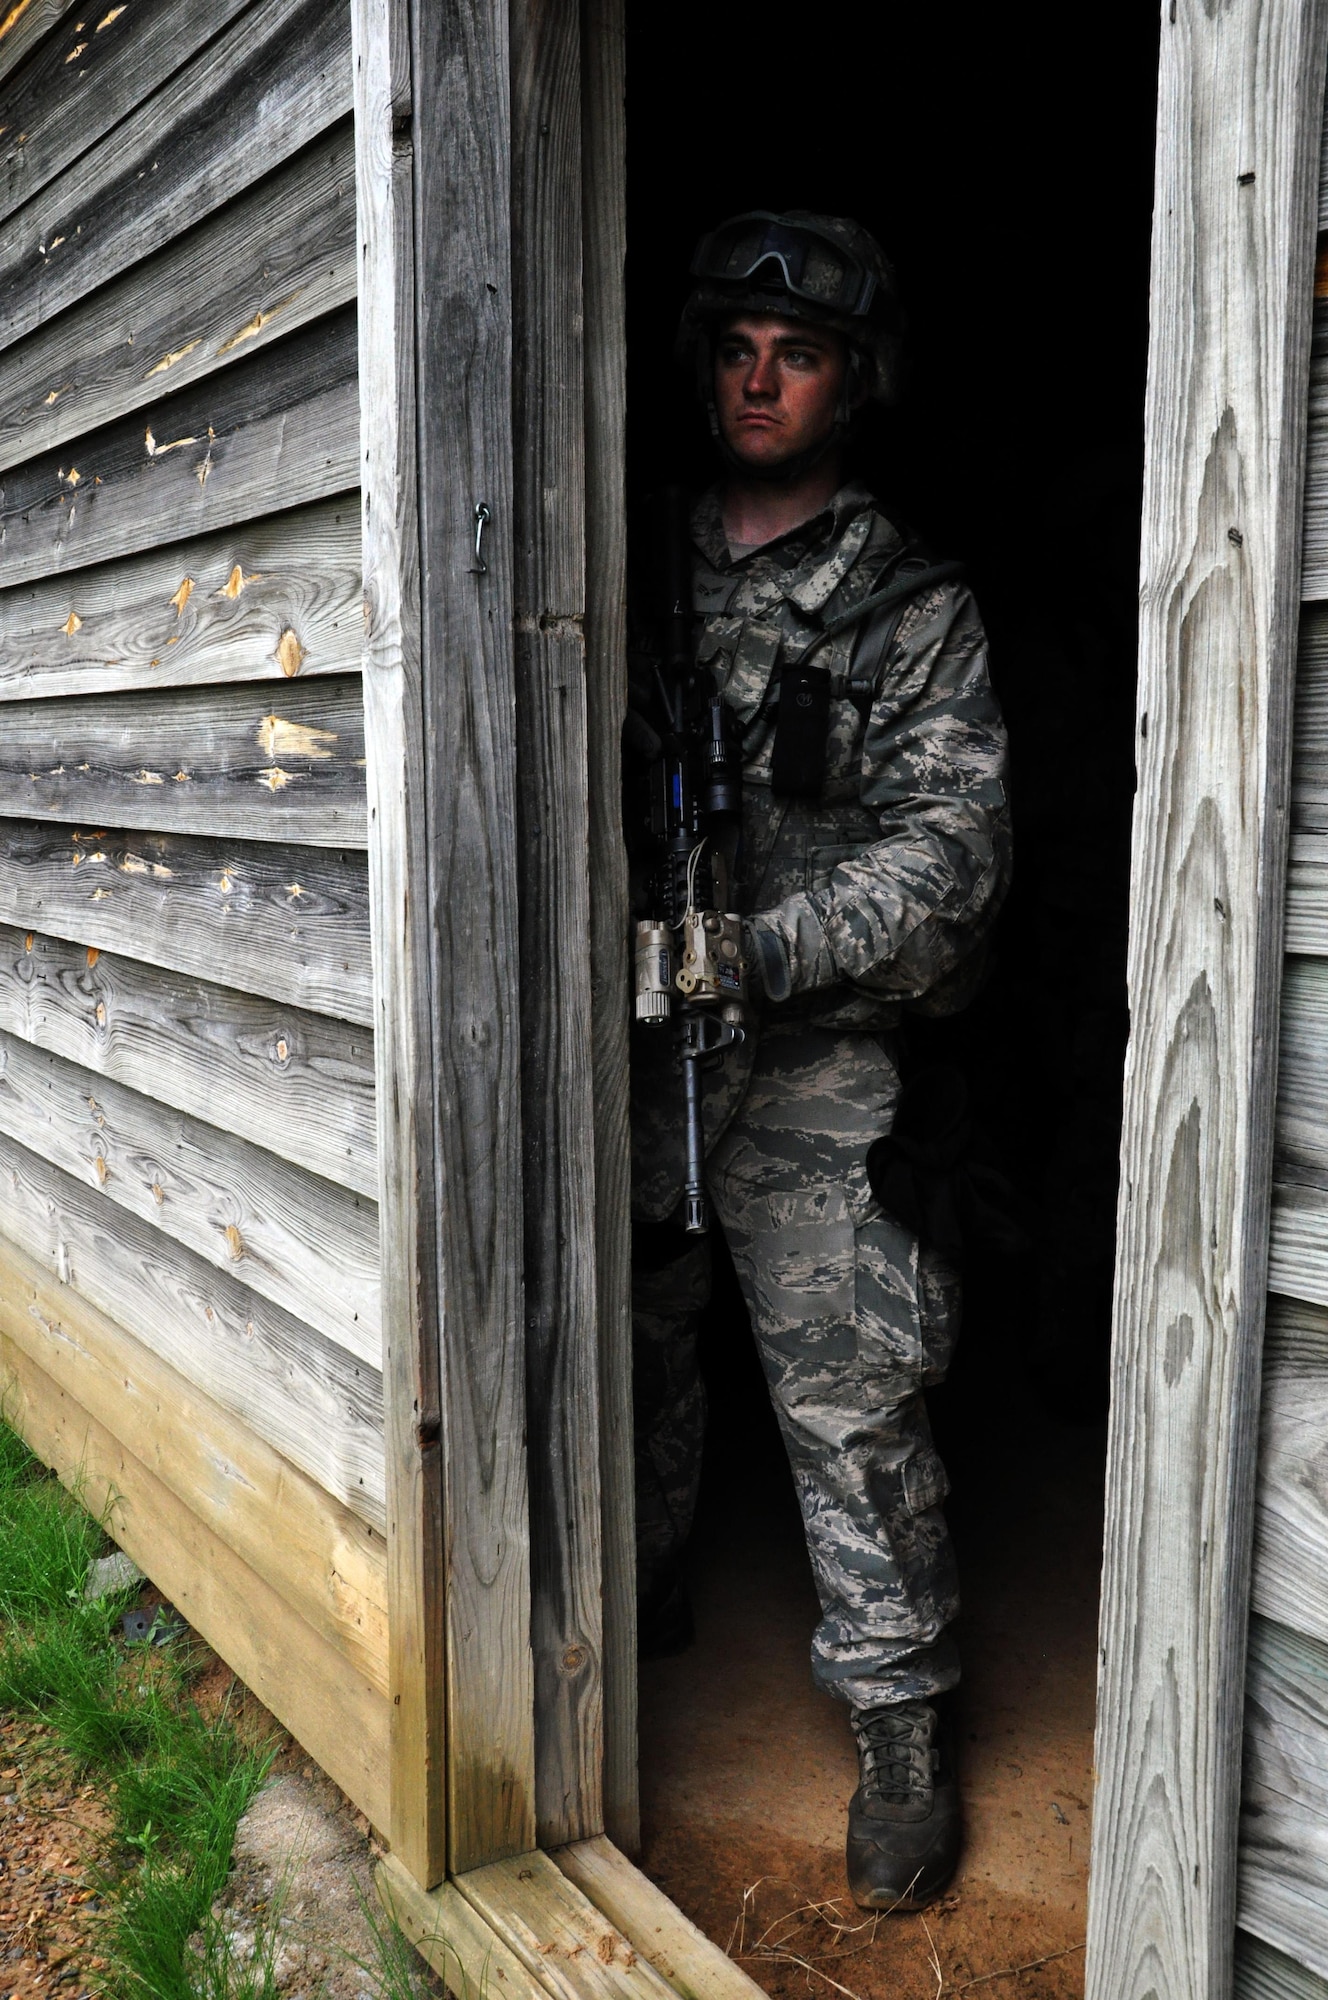 Senior Airman Samuel Sortet, 931st Security Forces Squadron, provides security during a  military operations on urban terrain (MOUT) training exercise at Camp Gruber Training Center, Okla., April 15, 2015.  More than 80 members of the 931 SFS and 931st Civil Engineer Squadron participated in ten days of combat skills training at Camp Gruber, which included land navigation, weapons training, tactical movements, convoy operations, base defense, room clearing procedures, foot patrols, military operations on urban terrain (MOUT) and combat lifesaving.  (U.S. Air Force photo by Capt. Zach Anderson)
